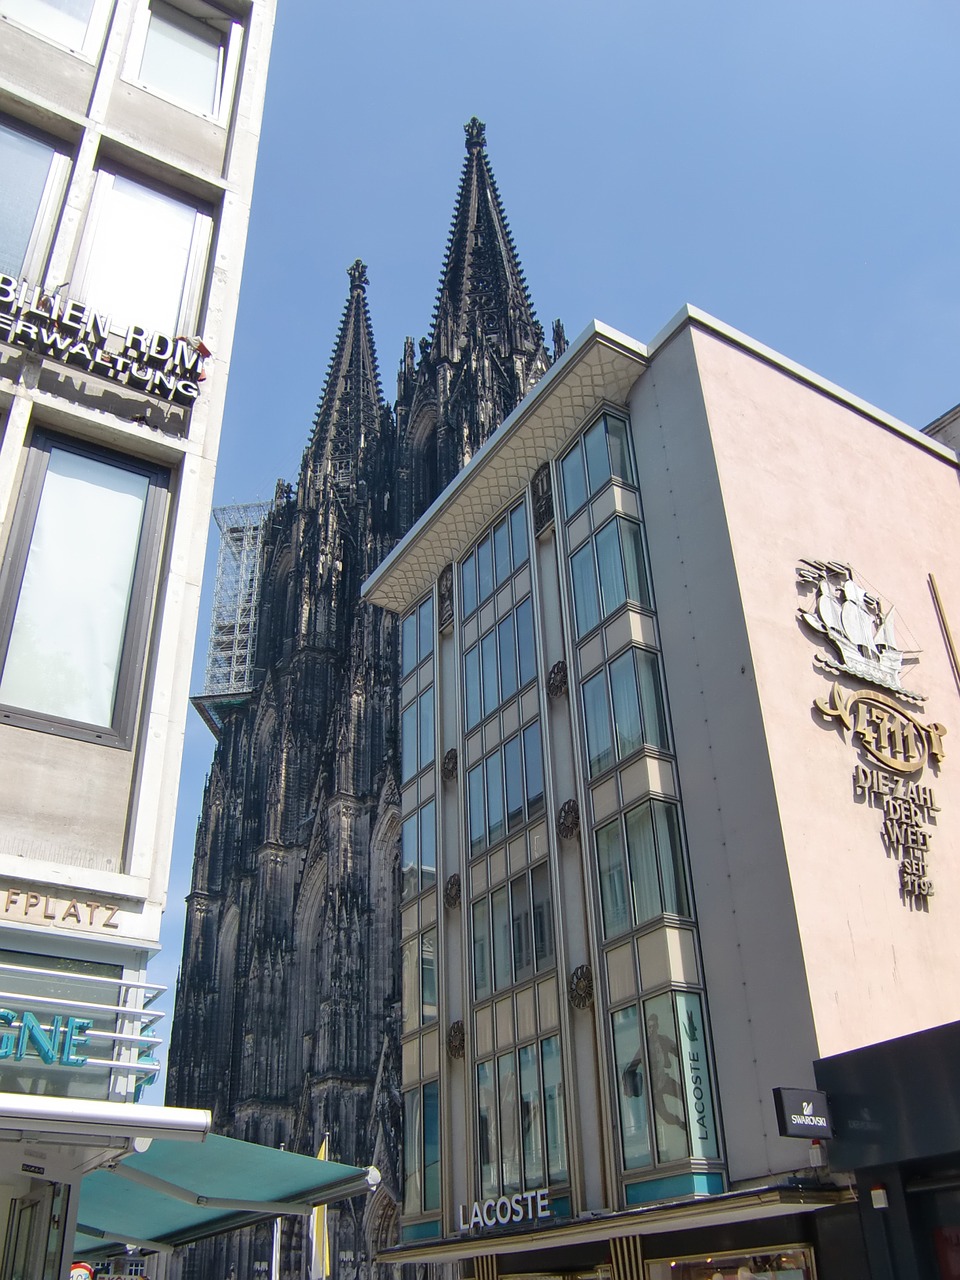 cologne architecture cologne cathedral free photo